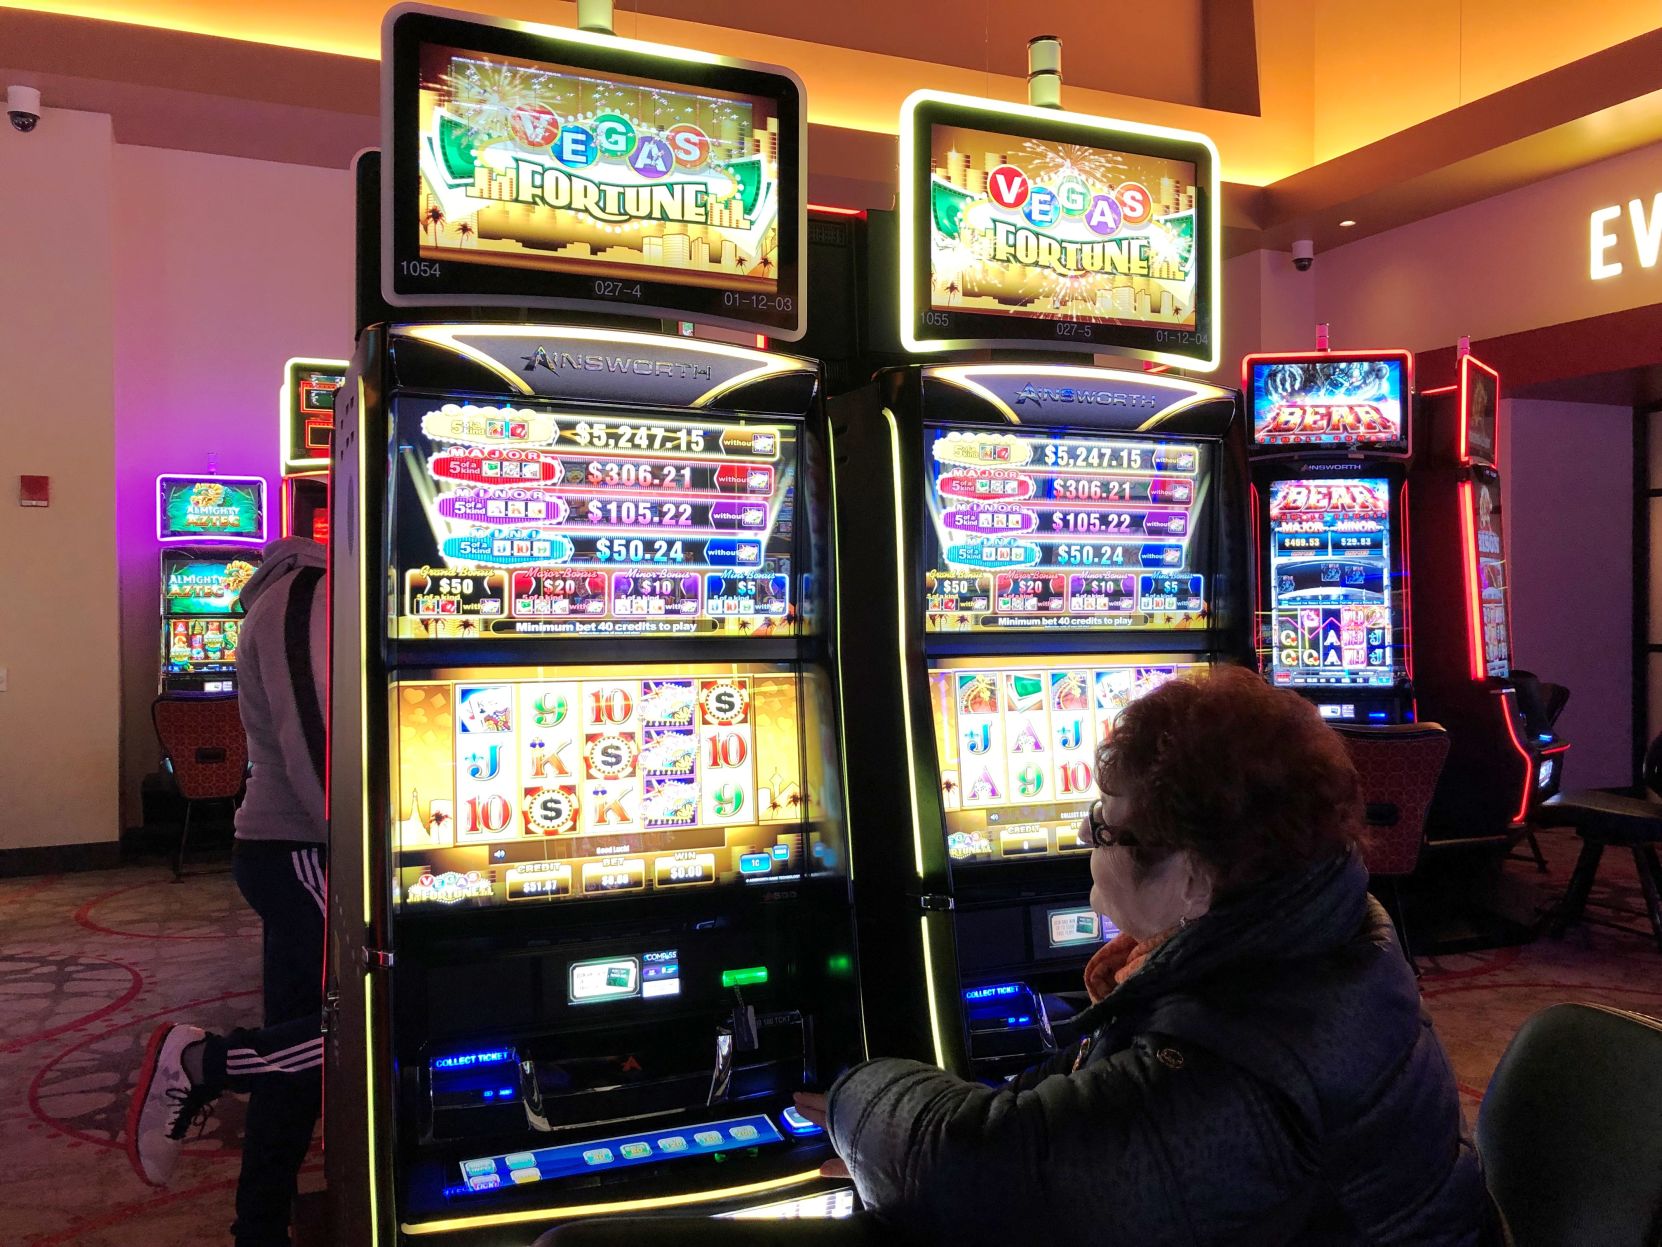 best slots to play at derby city gaming